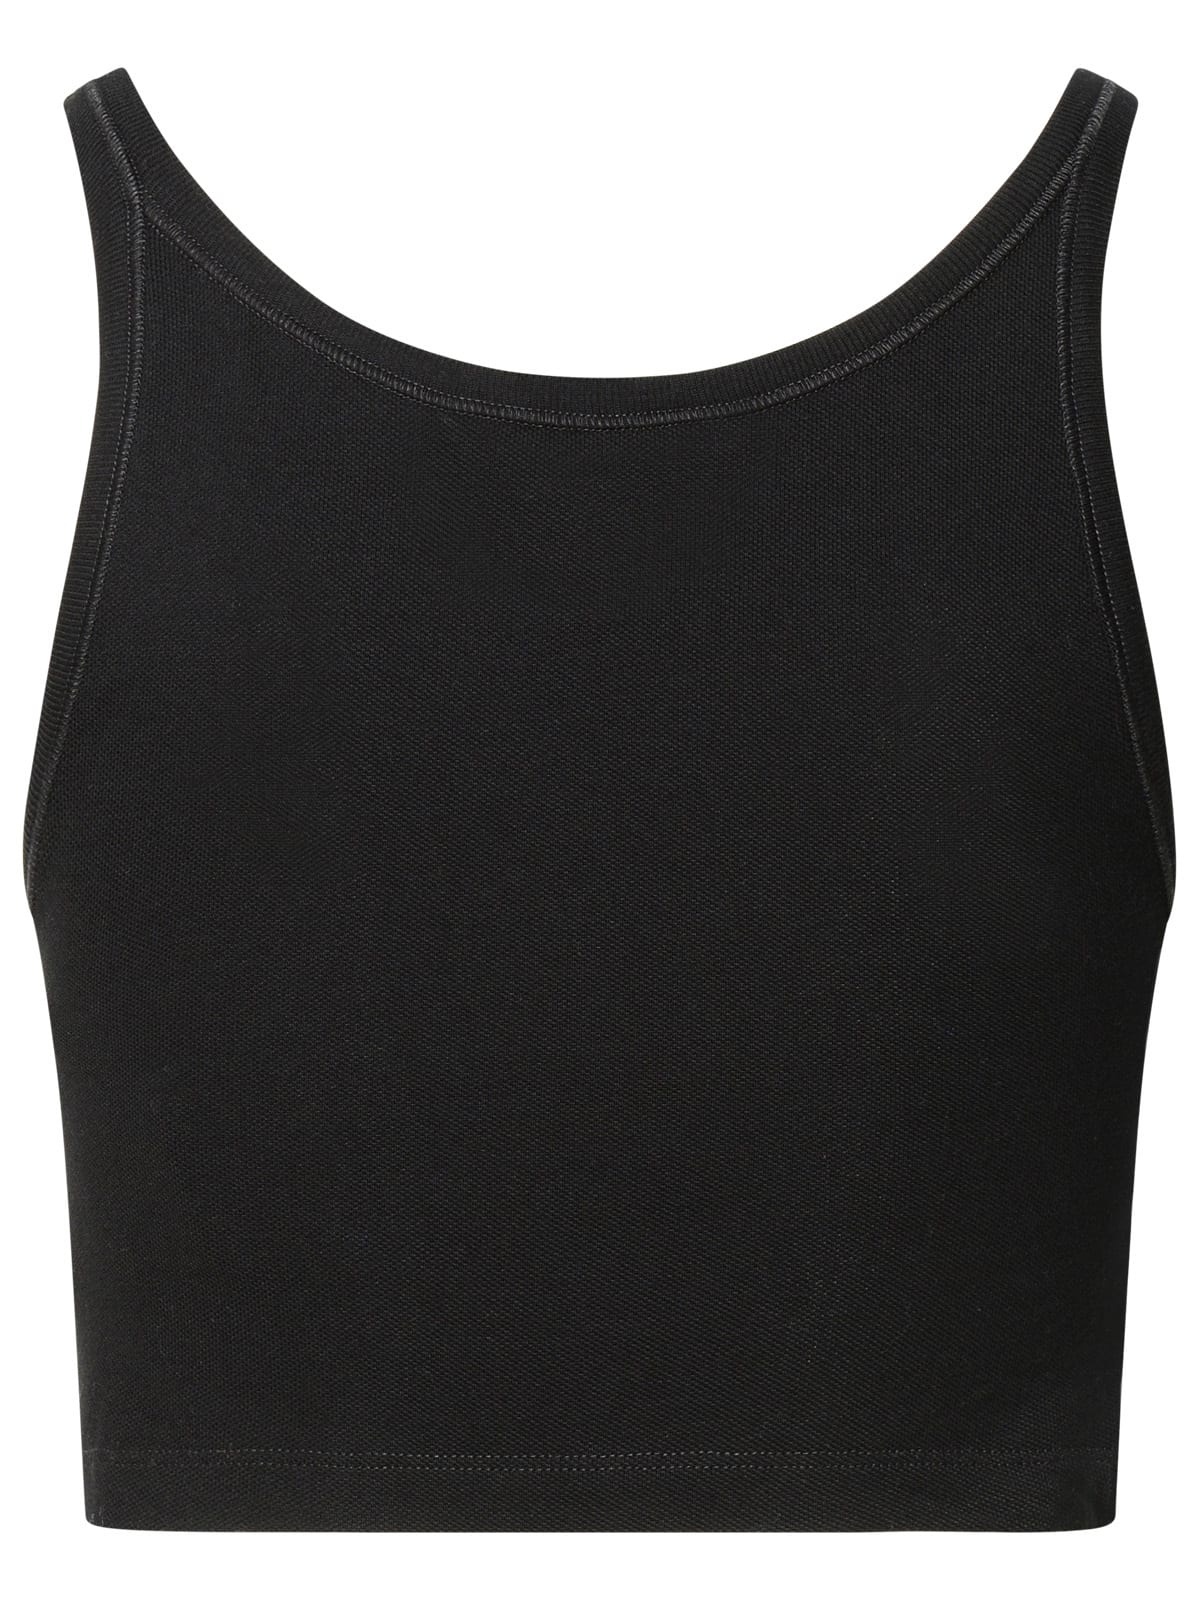 Shop Palm Angels Black Cotton Tank Top In Black/off White